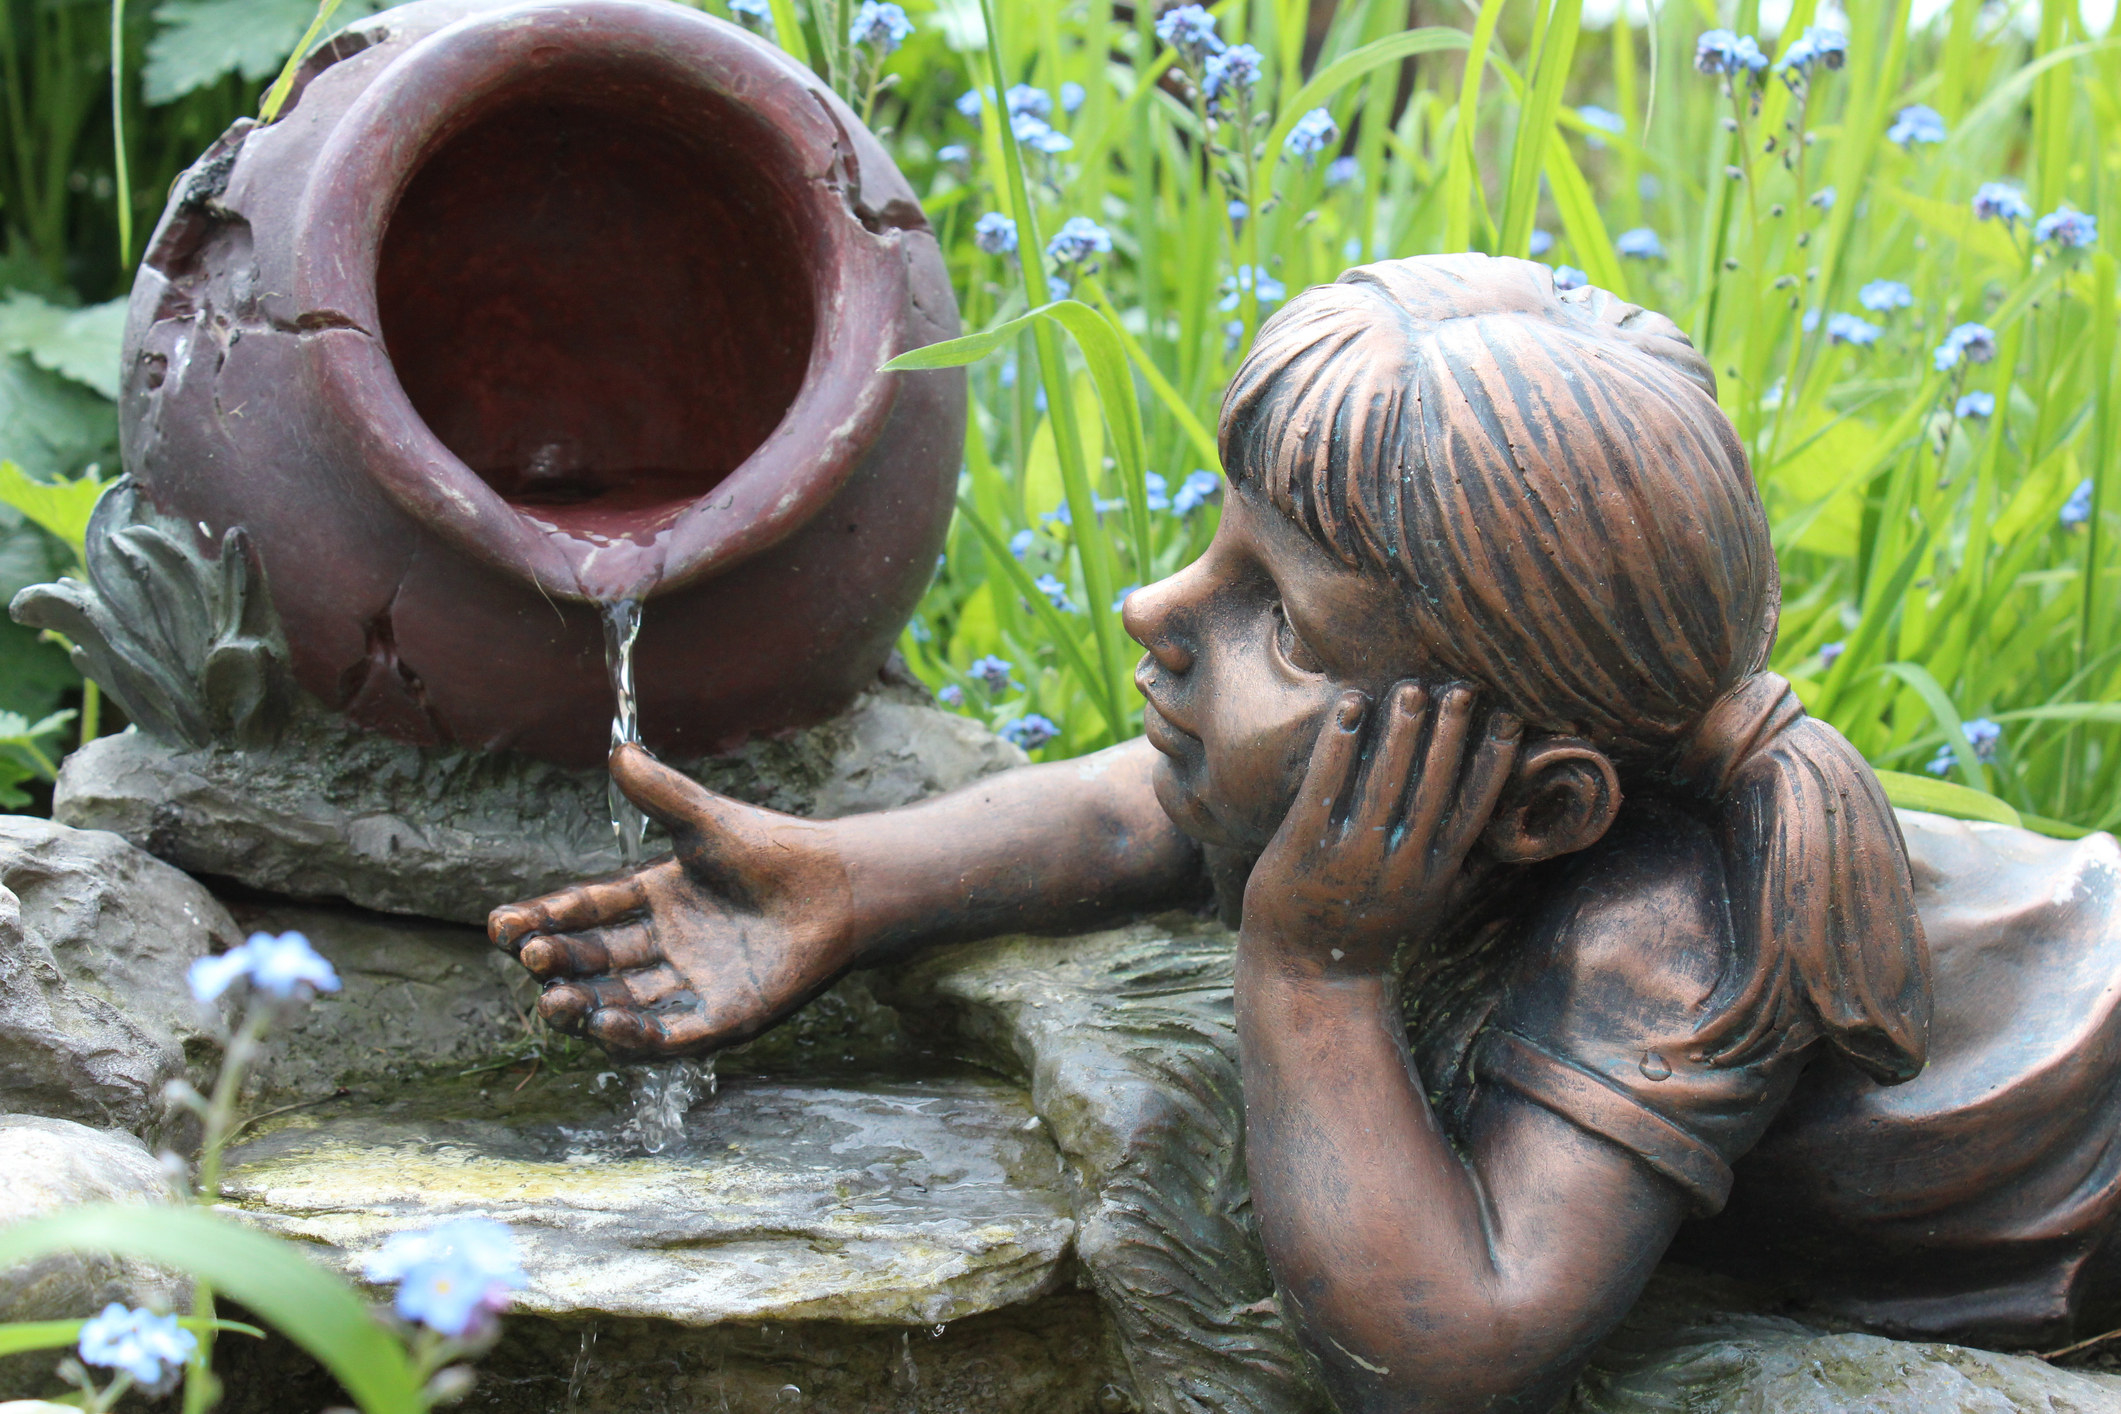 A water garden sculpture of a little girl with her hand under a pot that is spilling water